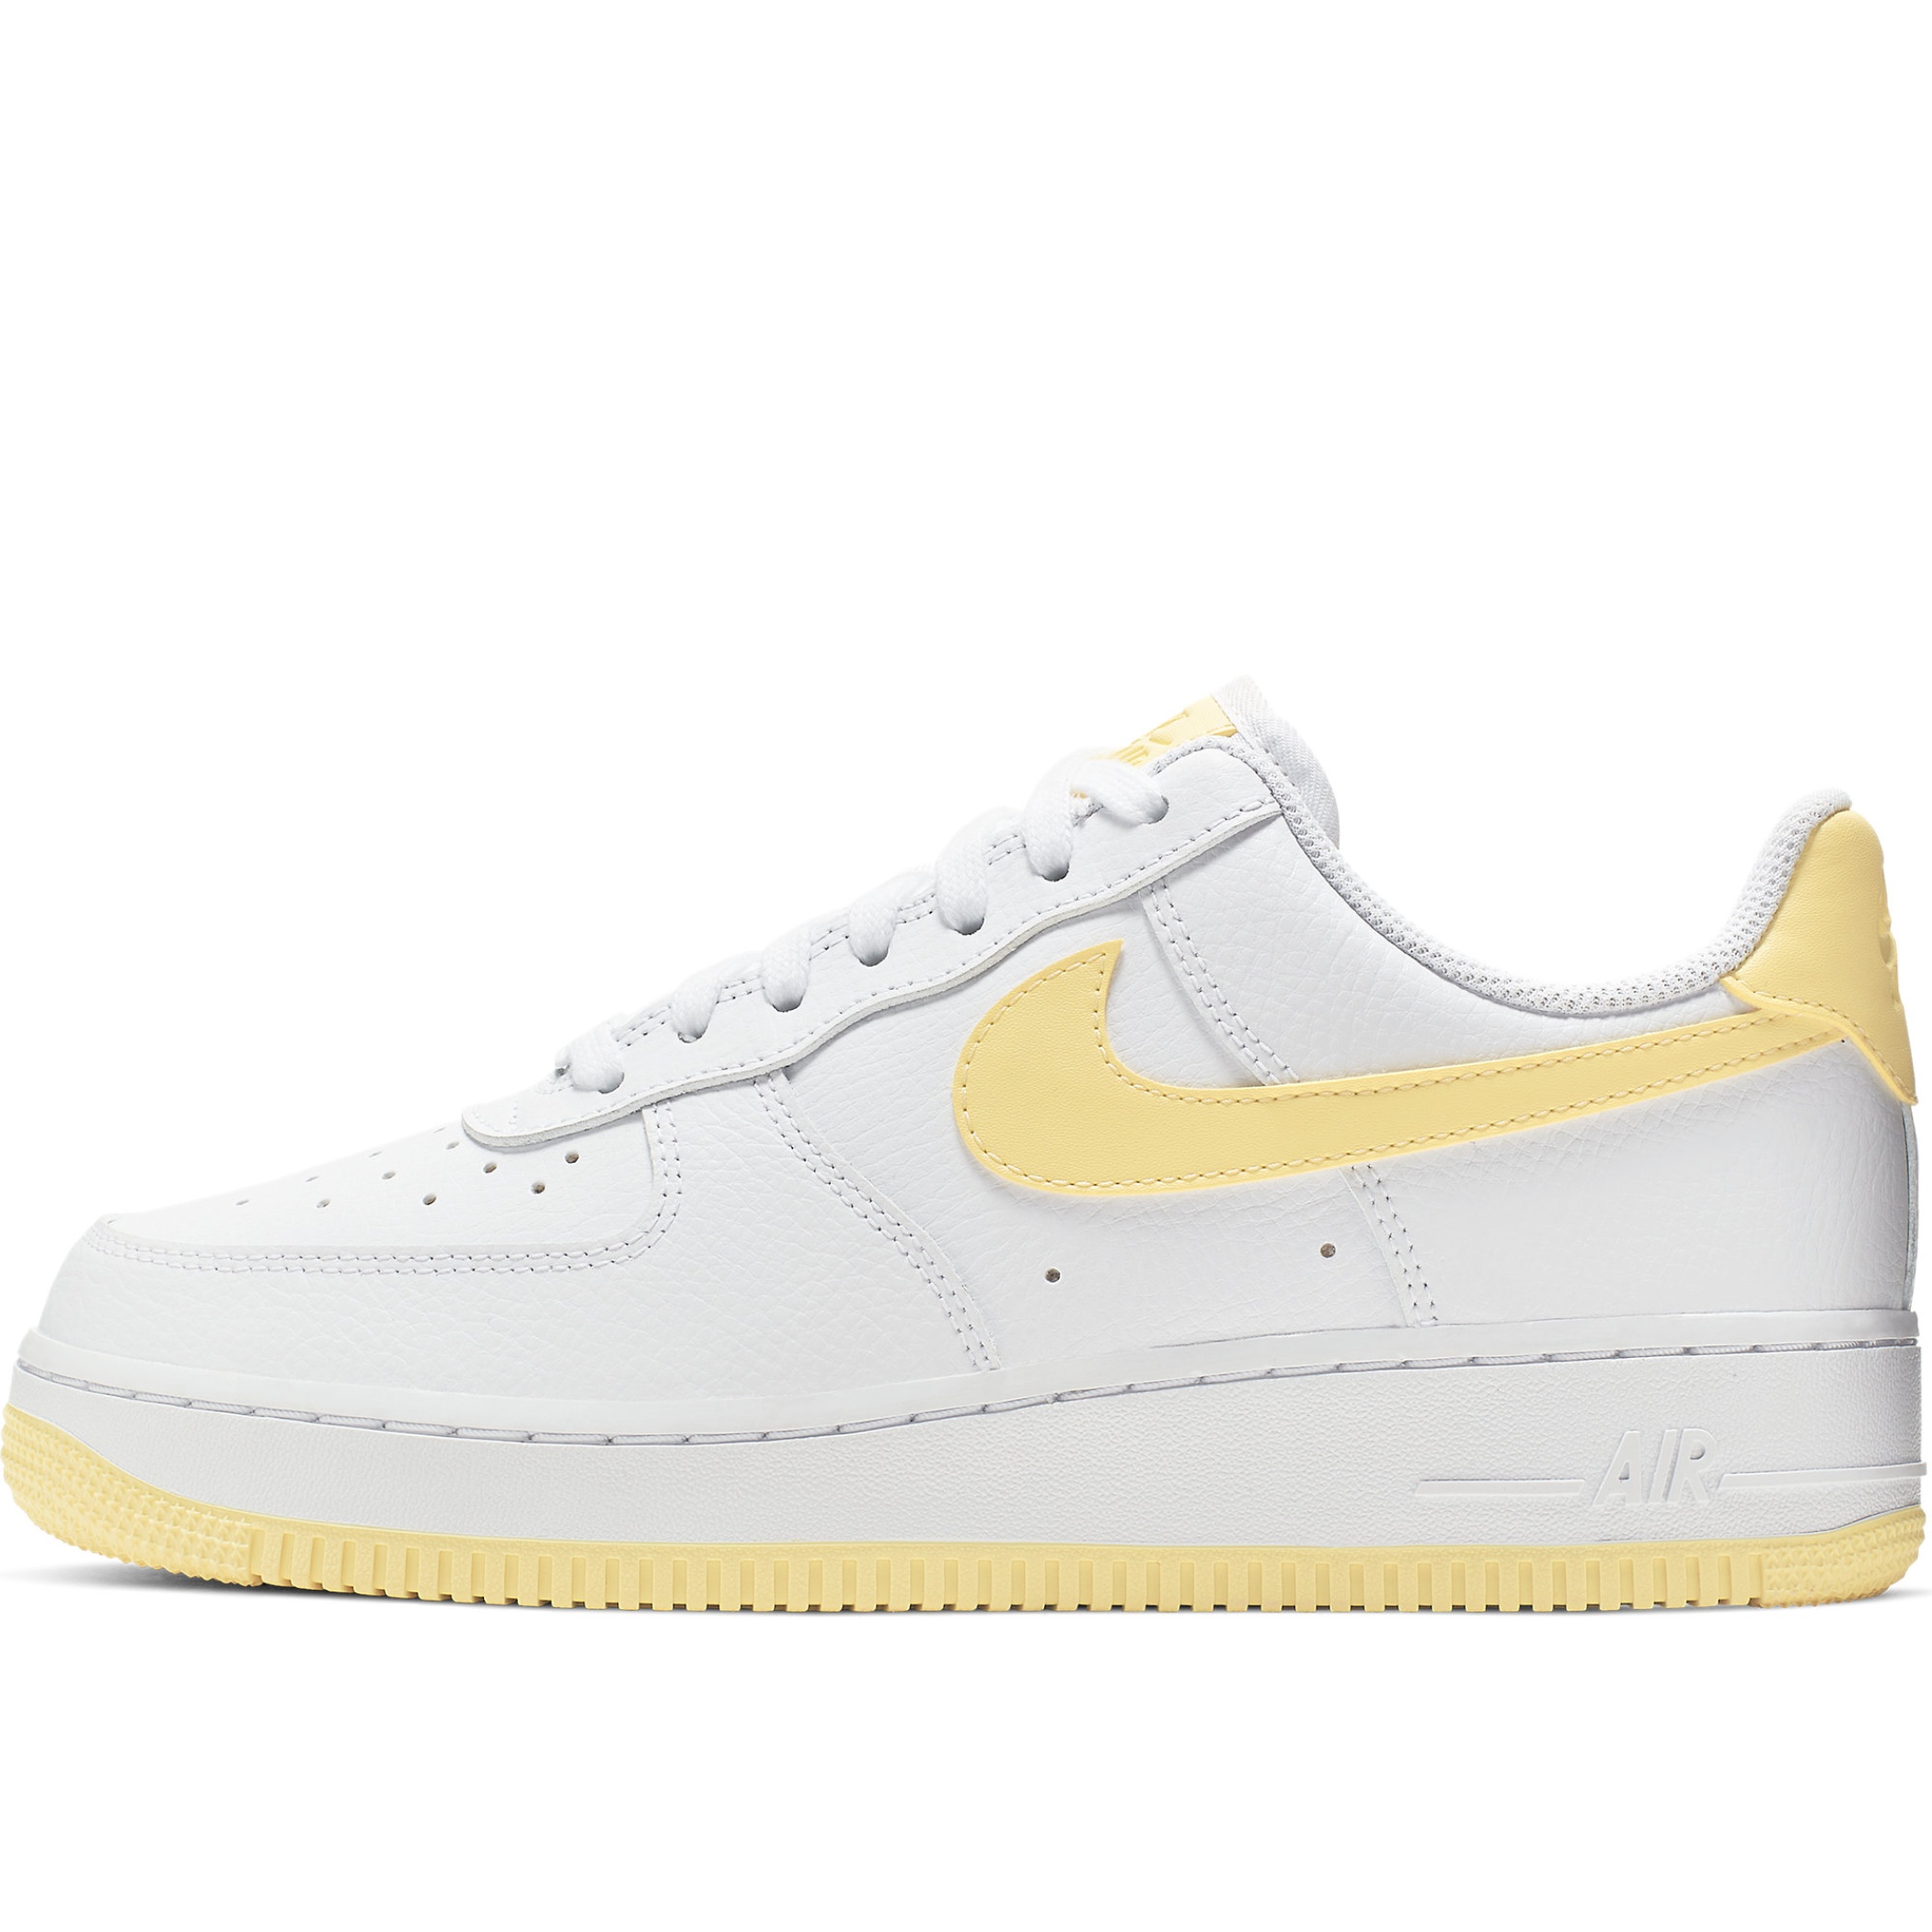 air force 1 yellow and white